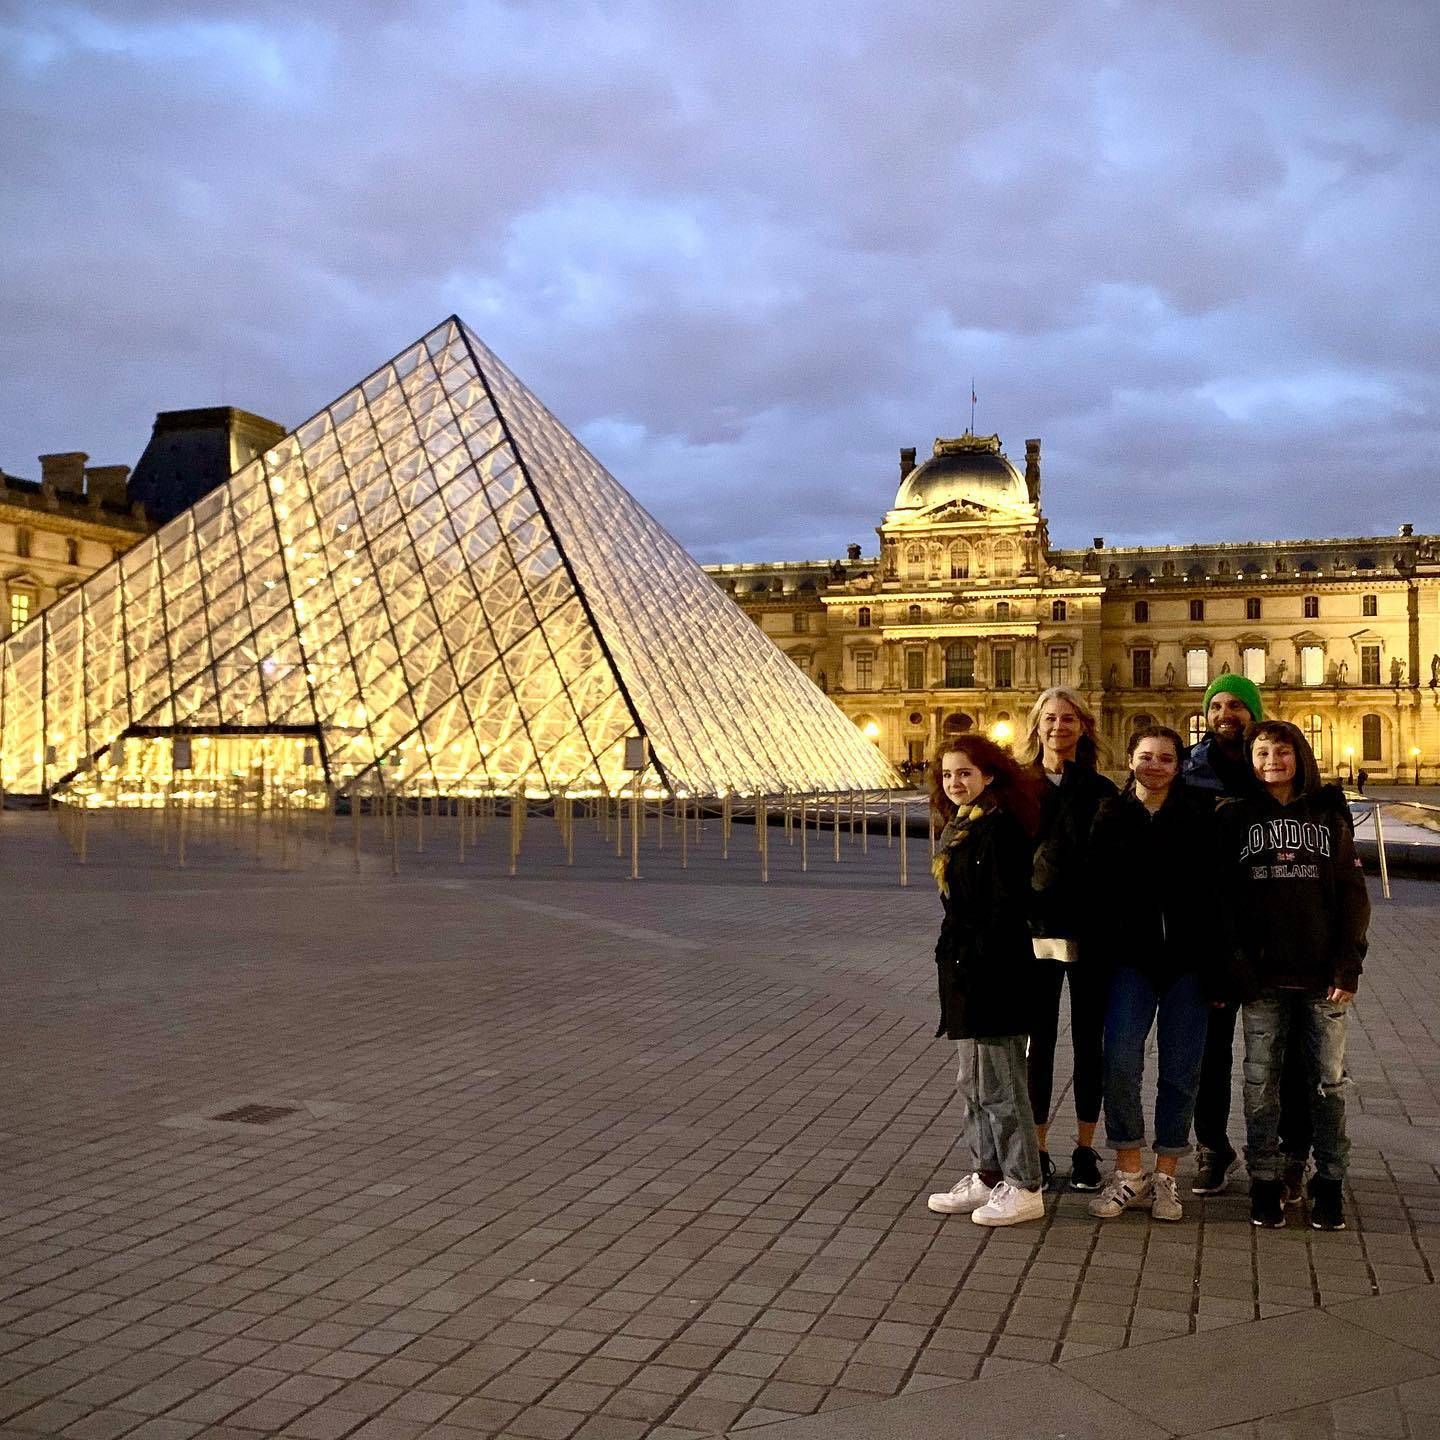 The family stands before the Louvre Pyramid shortly before the city went quiet.